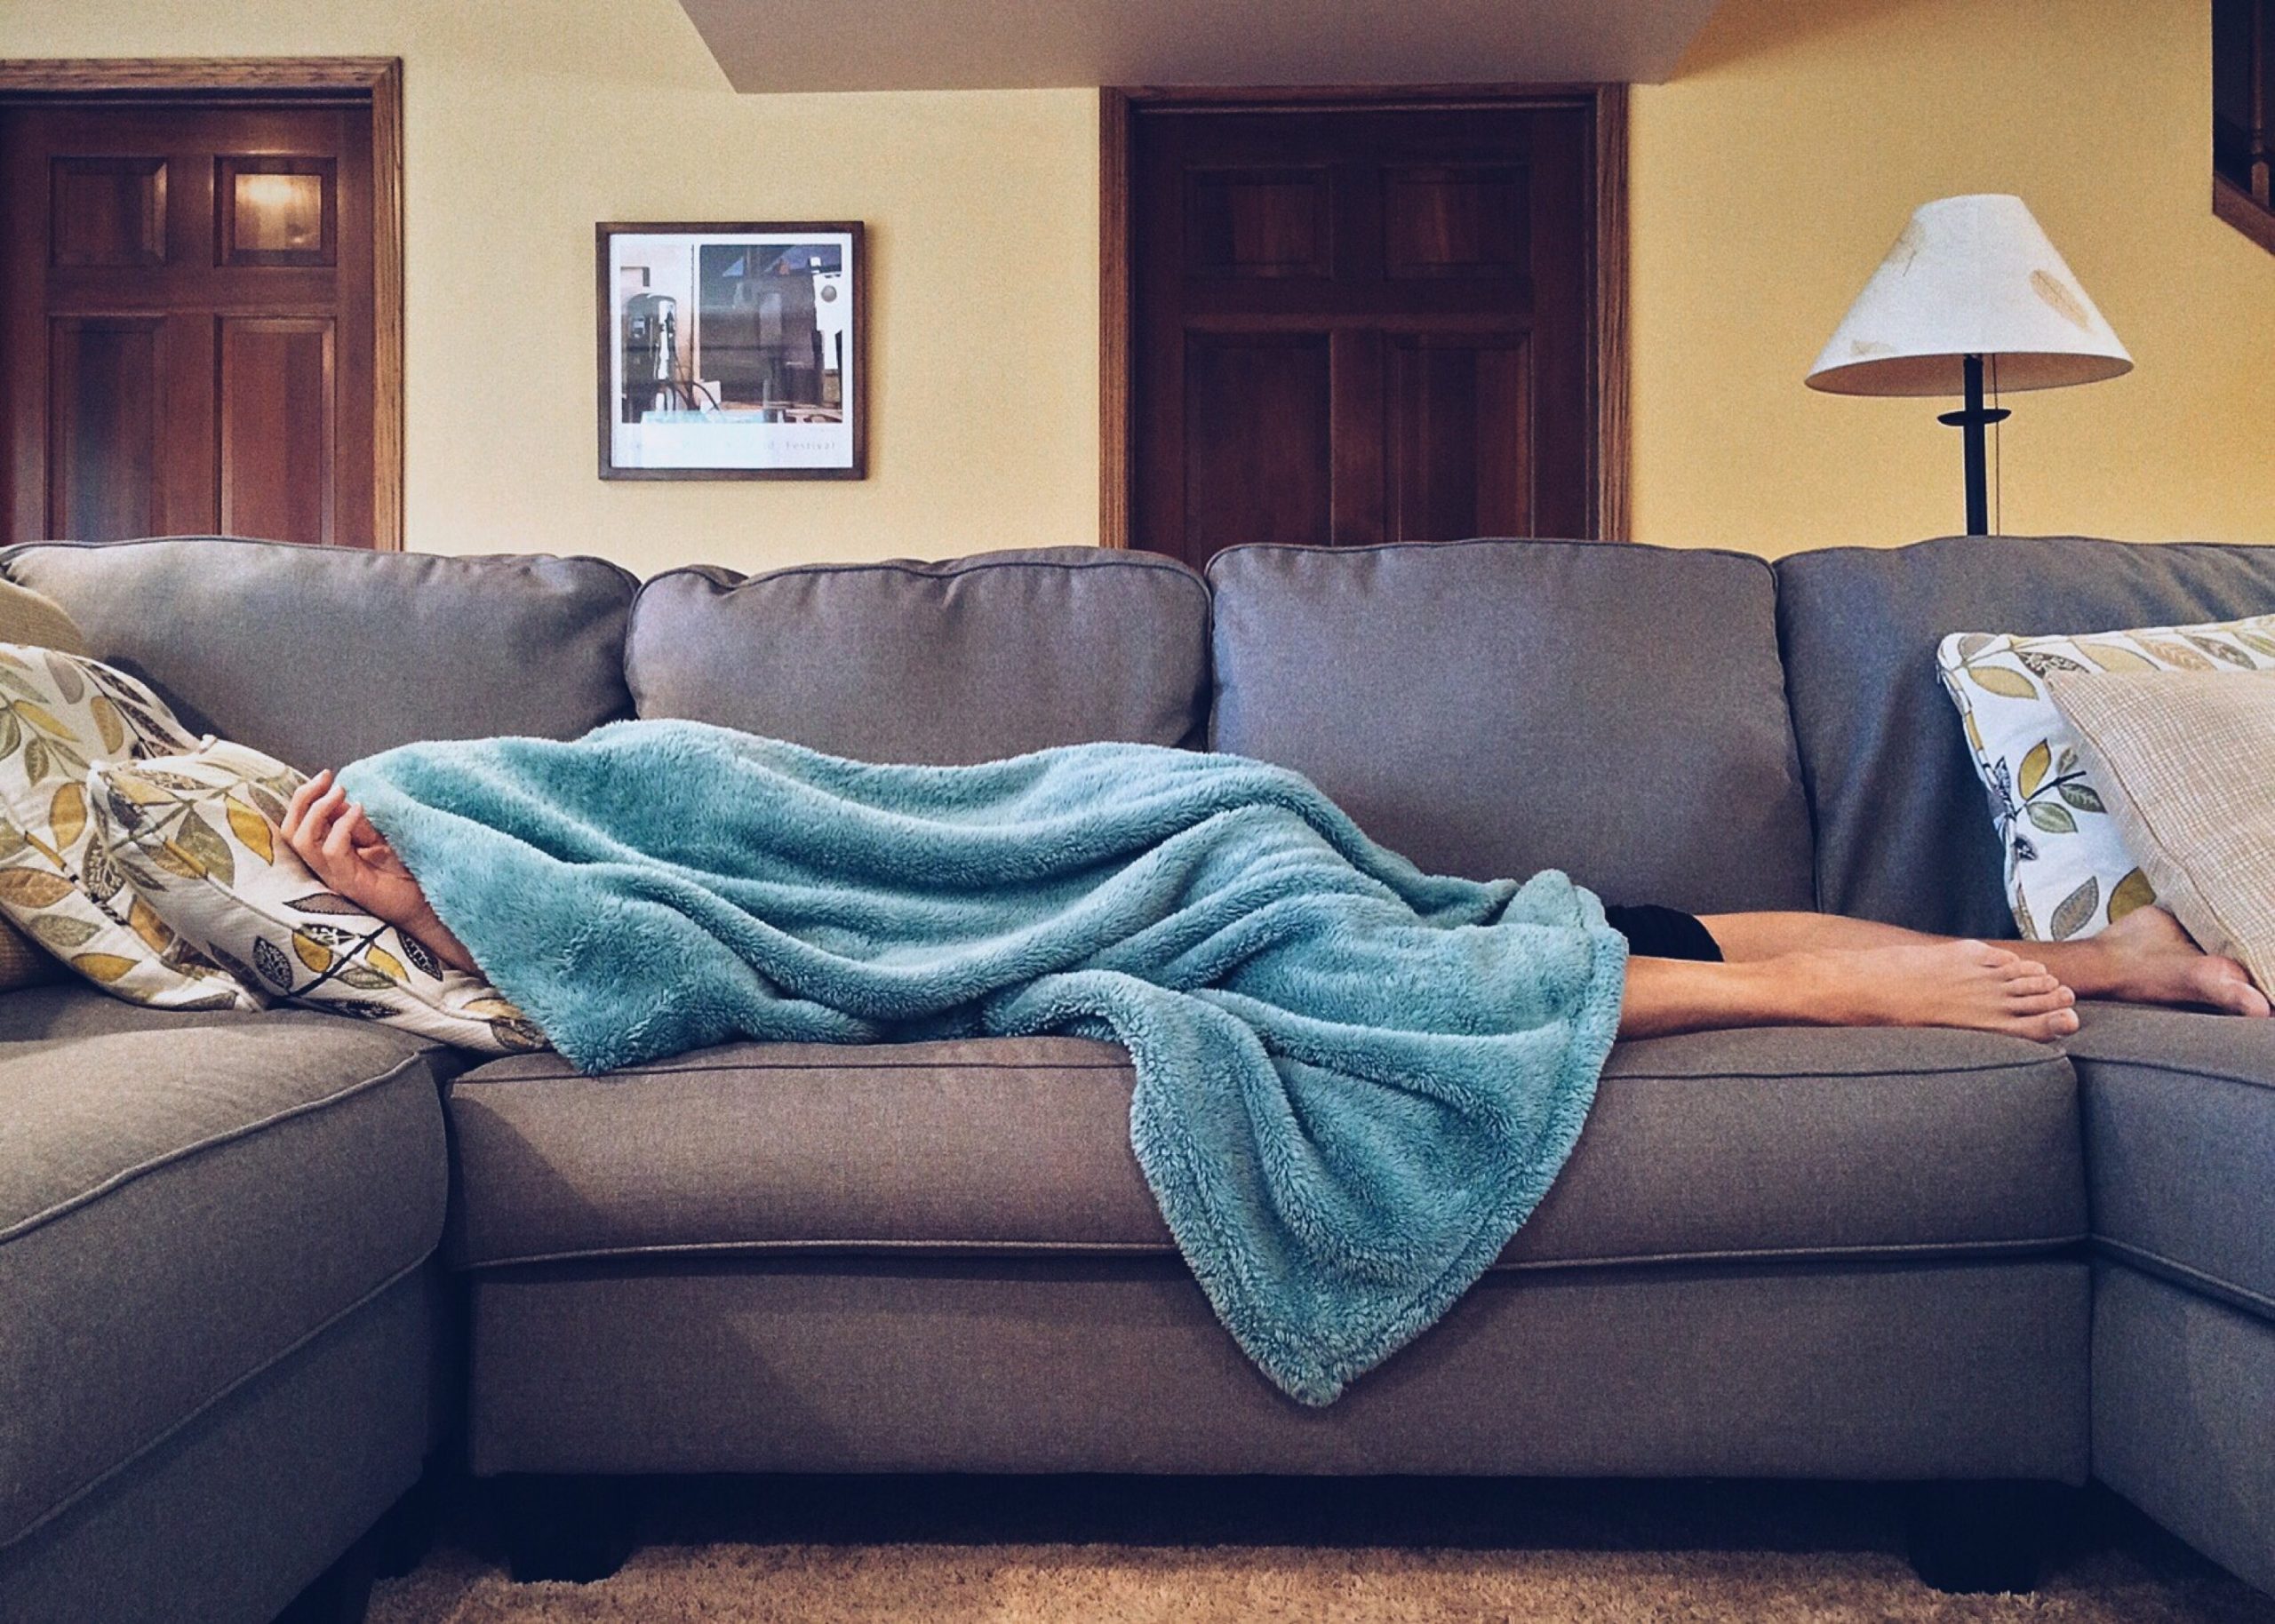 employee productivity and work culture and sick days